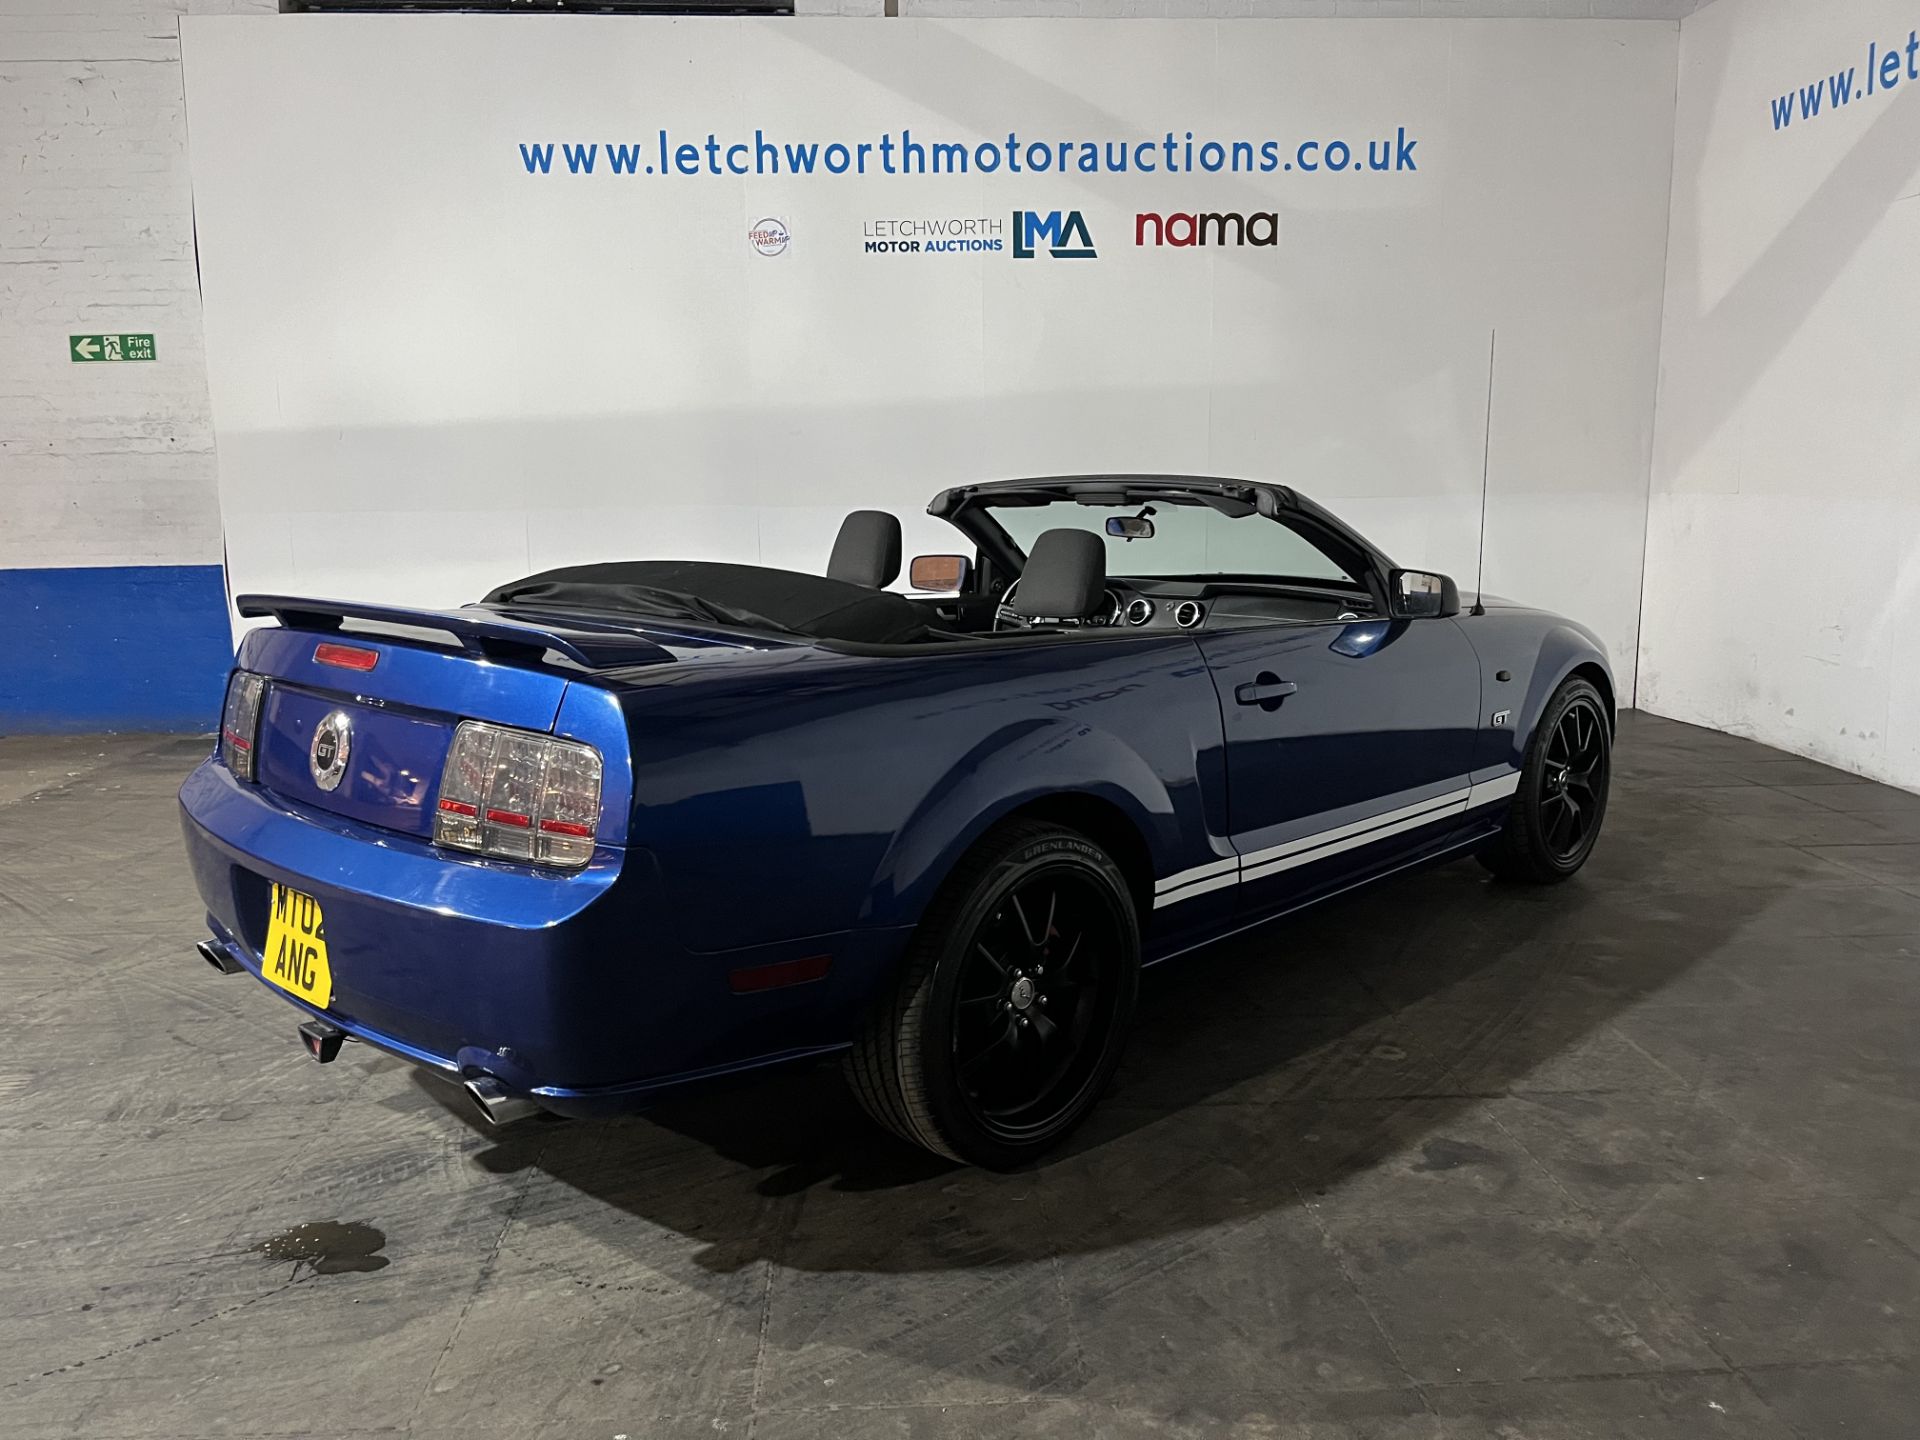 2006 Ford Mustang Convertible - 4700cc - Image 11 of 23